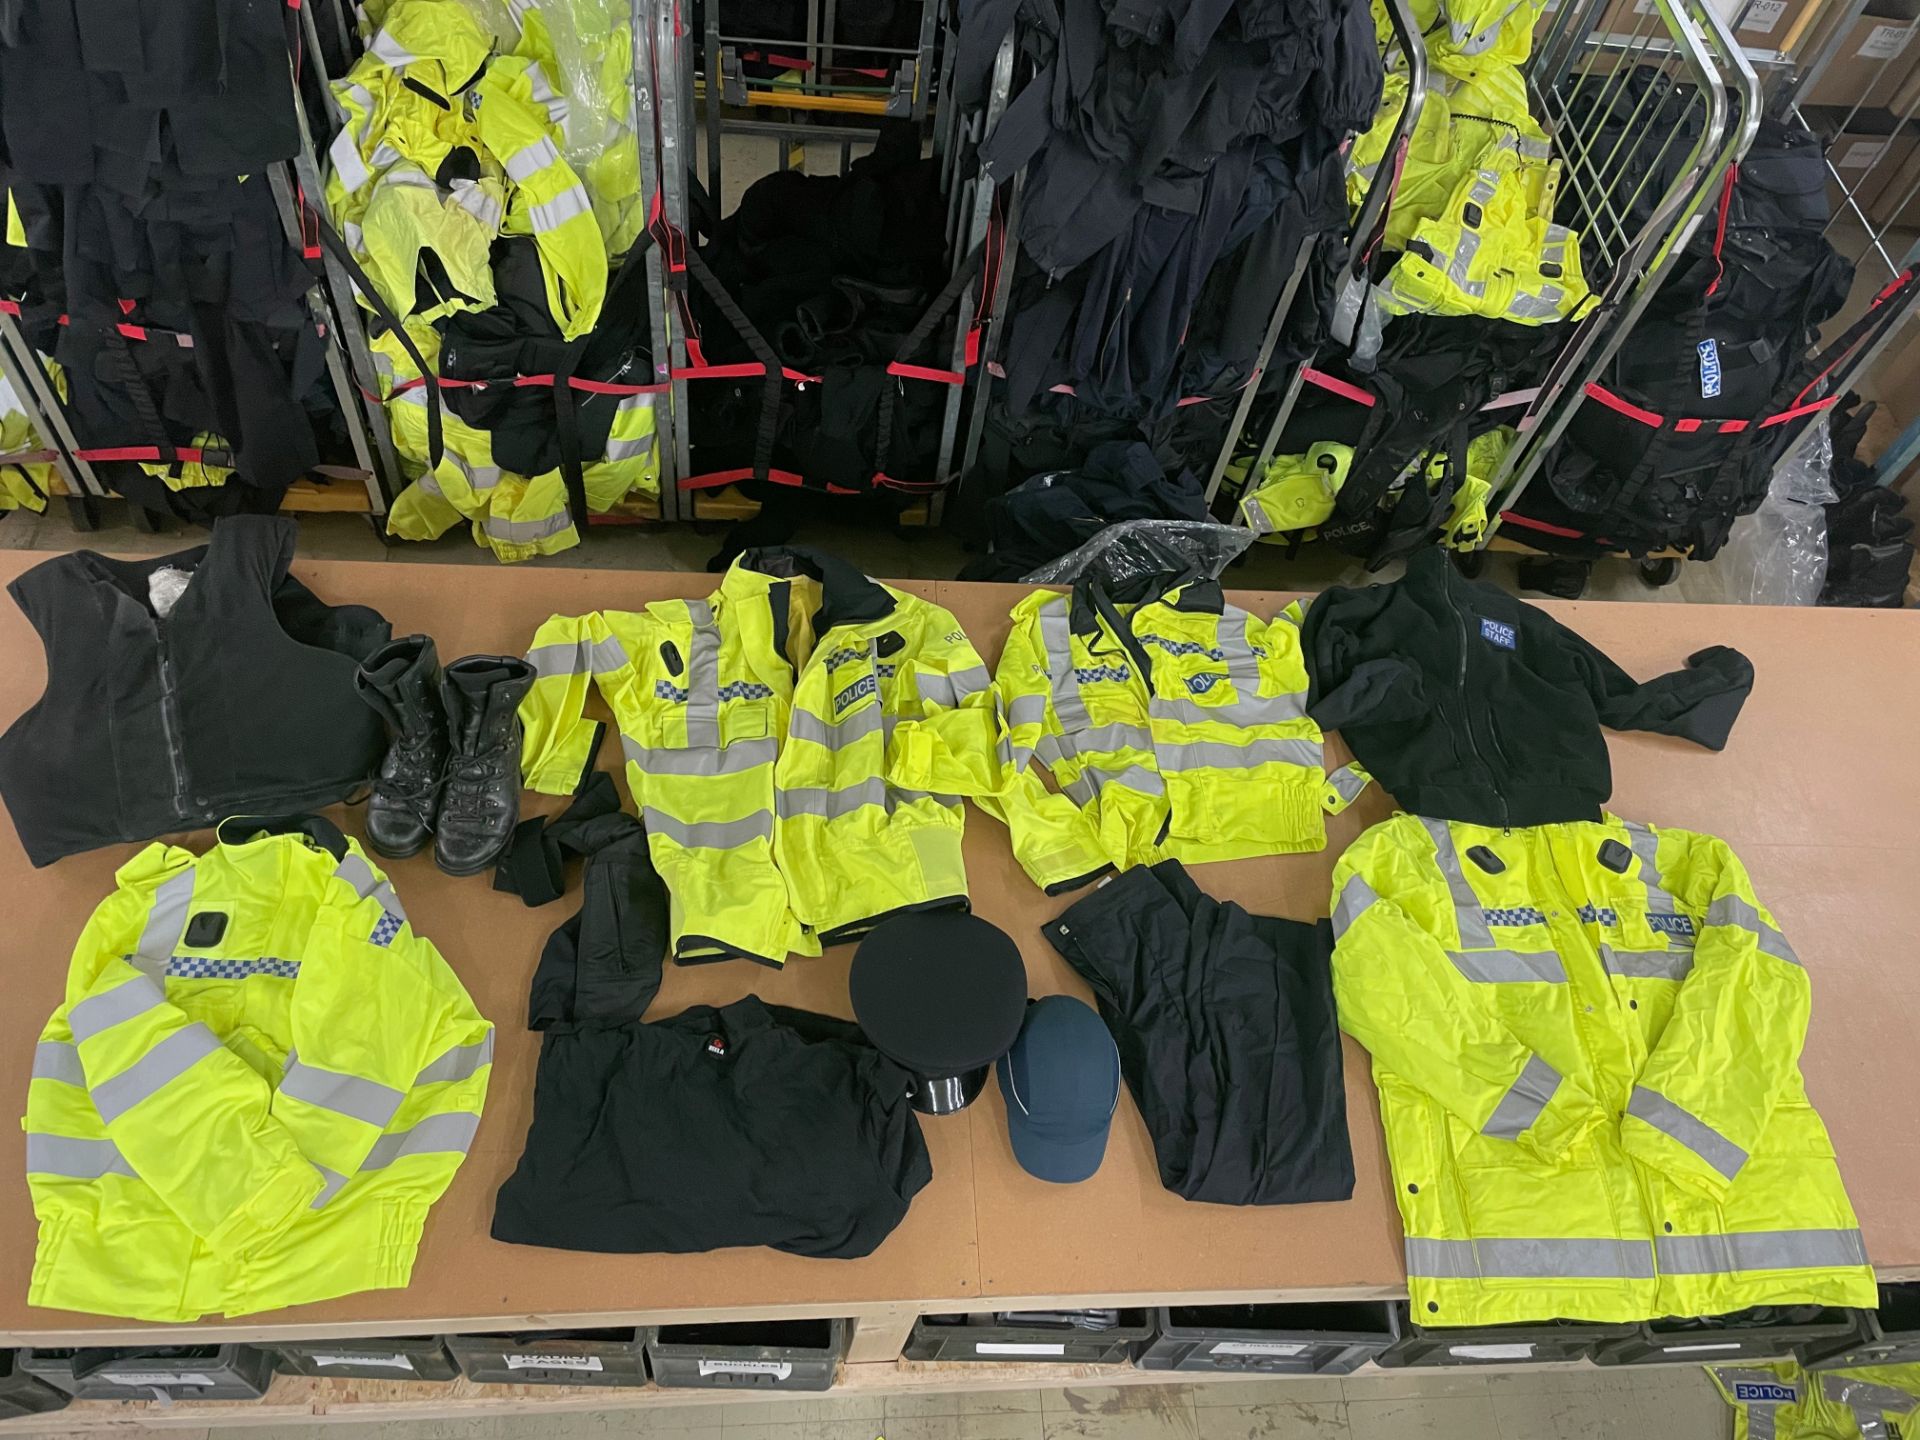 10 X BAGS OF EX POLICE CLOTHING - RRP £2750.00 - Image 6 of 12